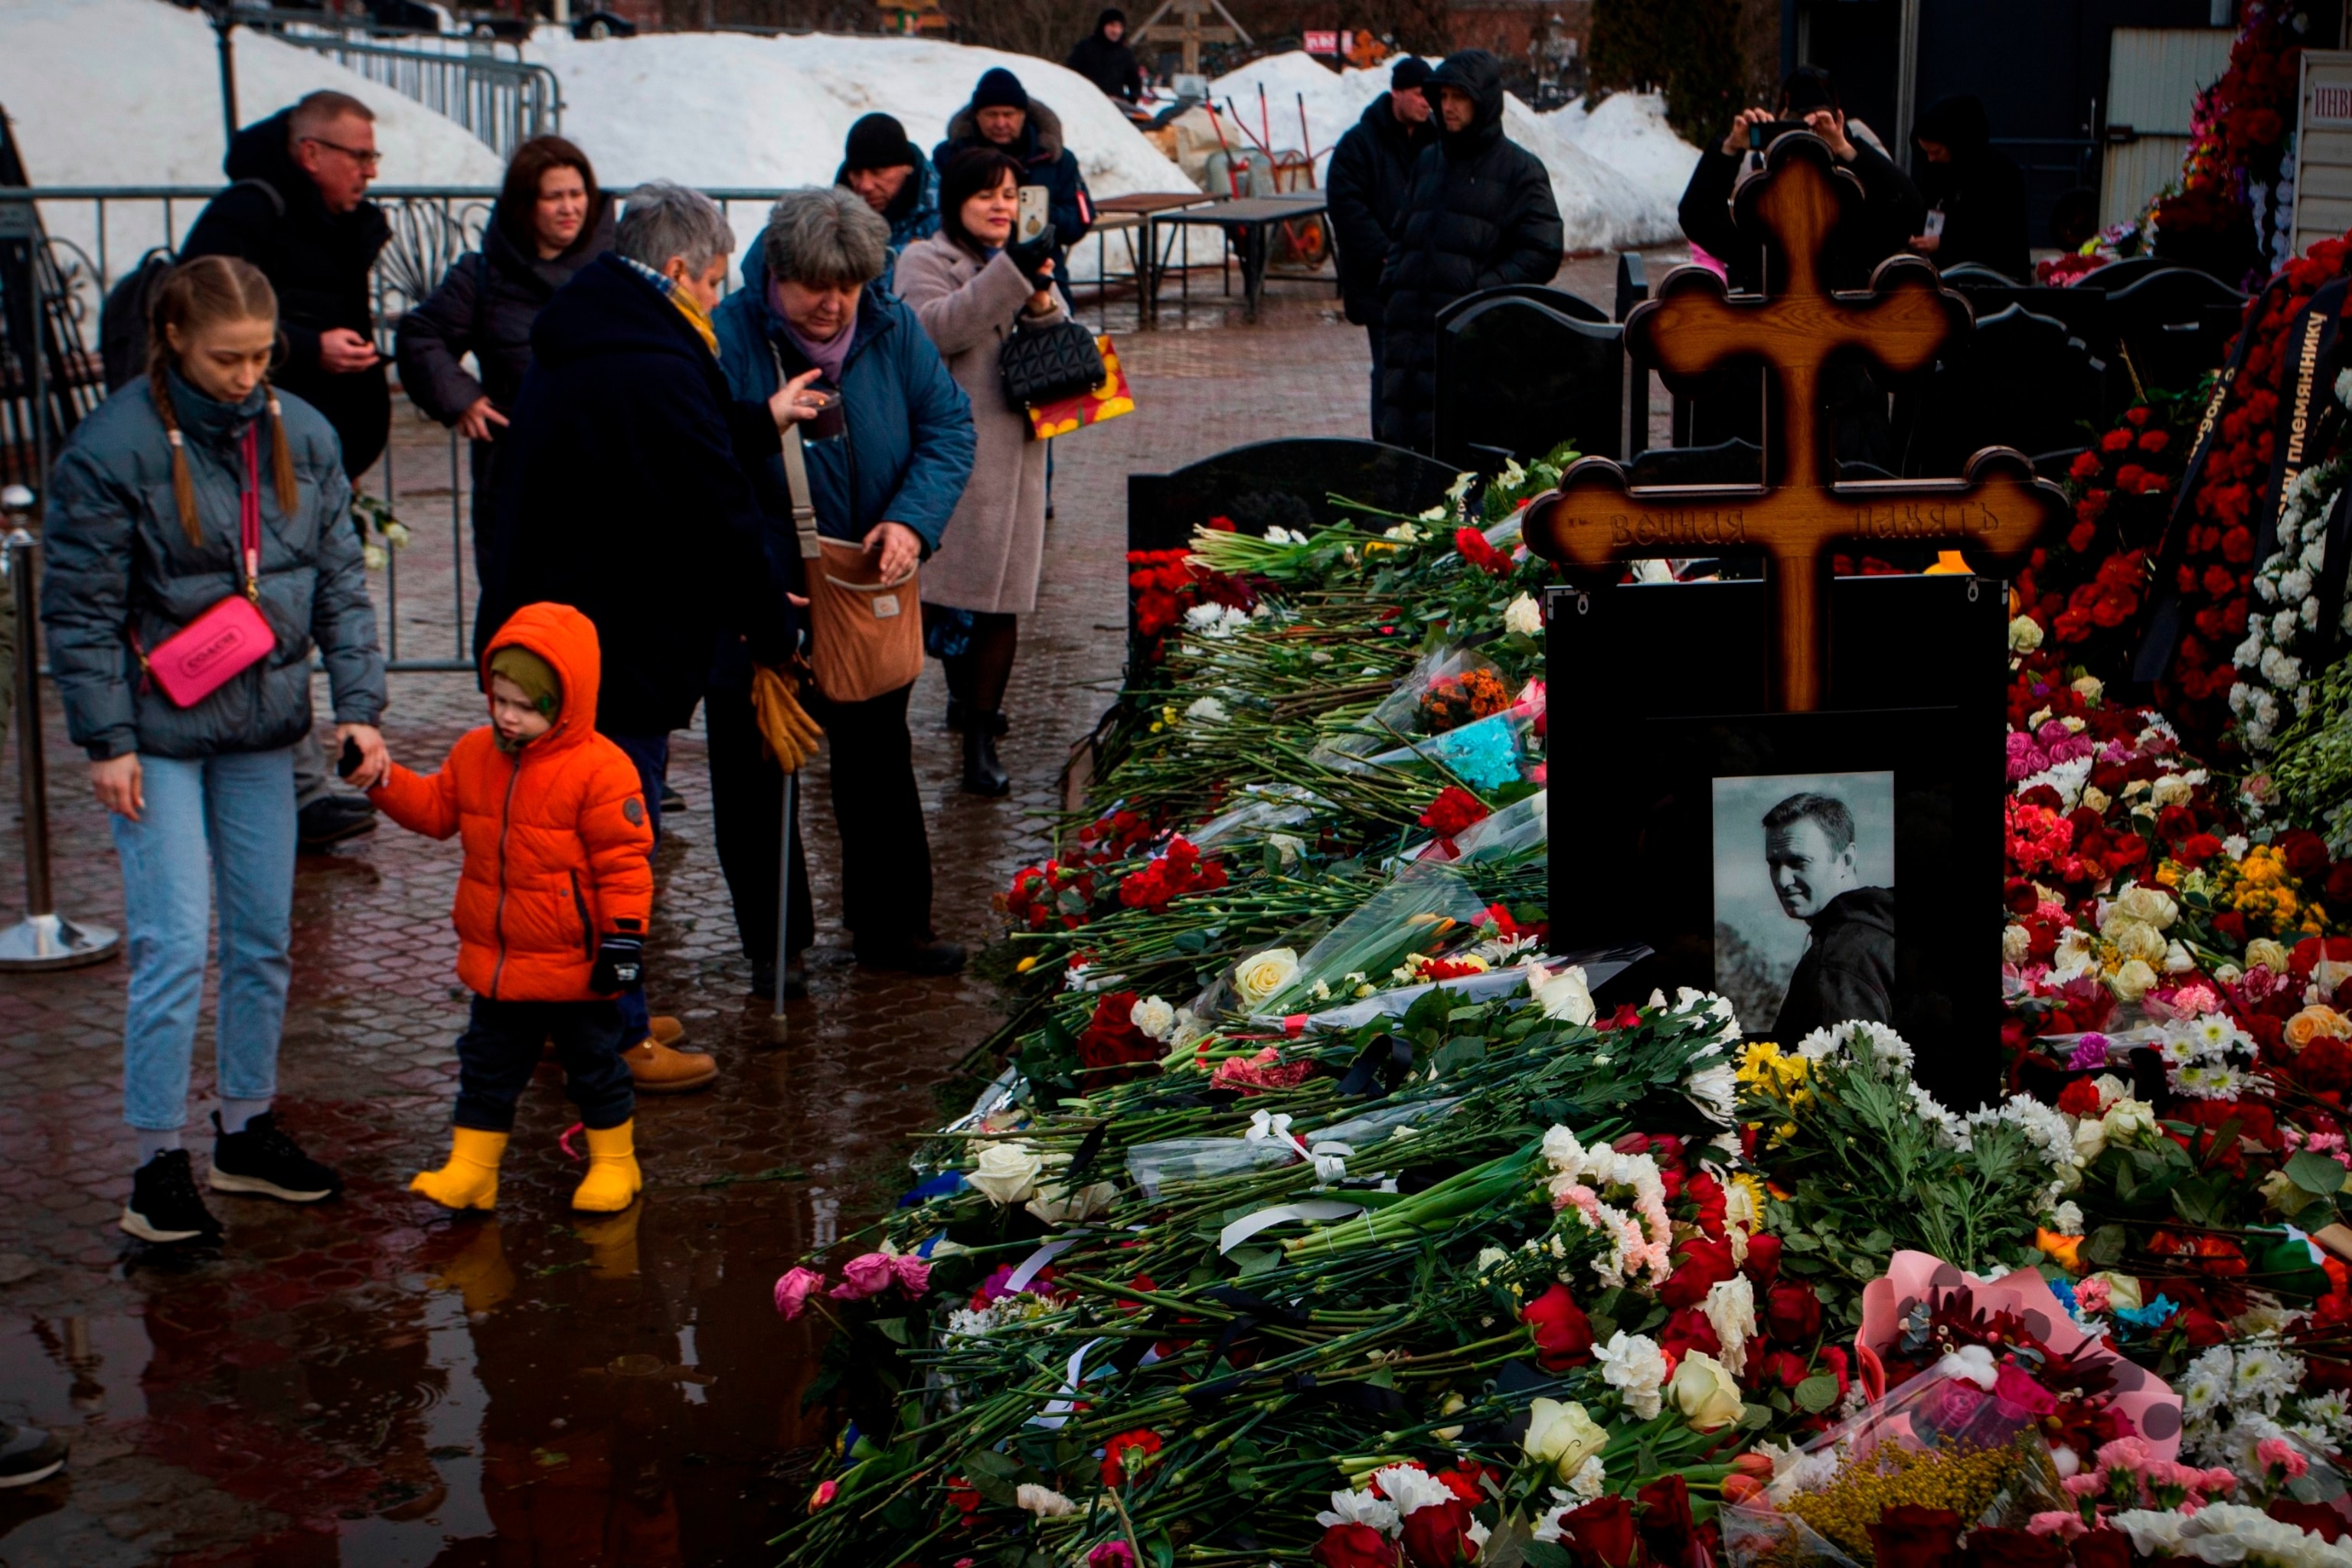 PHOTO: People lay flowers at the grave of Russian opposition leader Alexei Navalny to honor his memory at the Borisov Cemetery in Moscow.